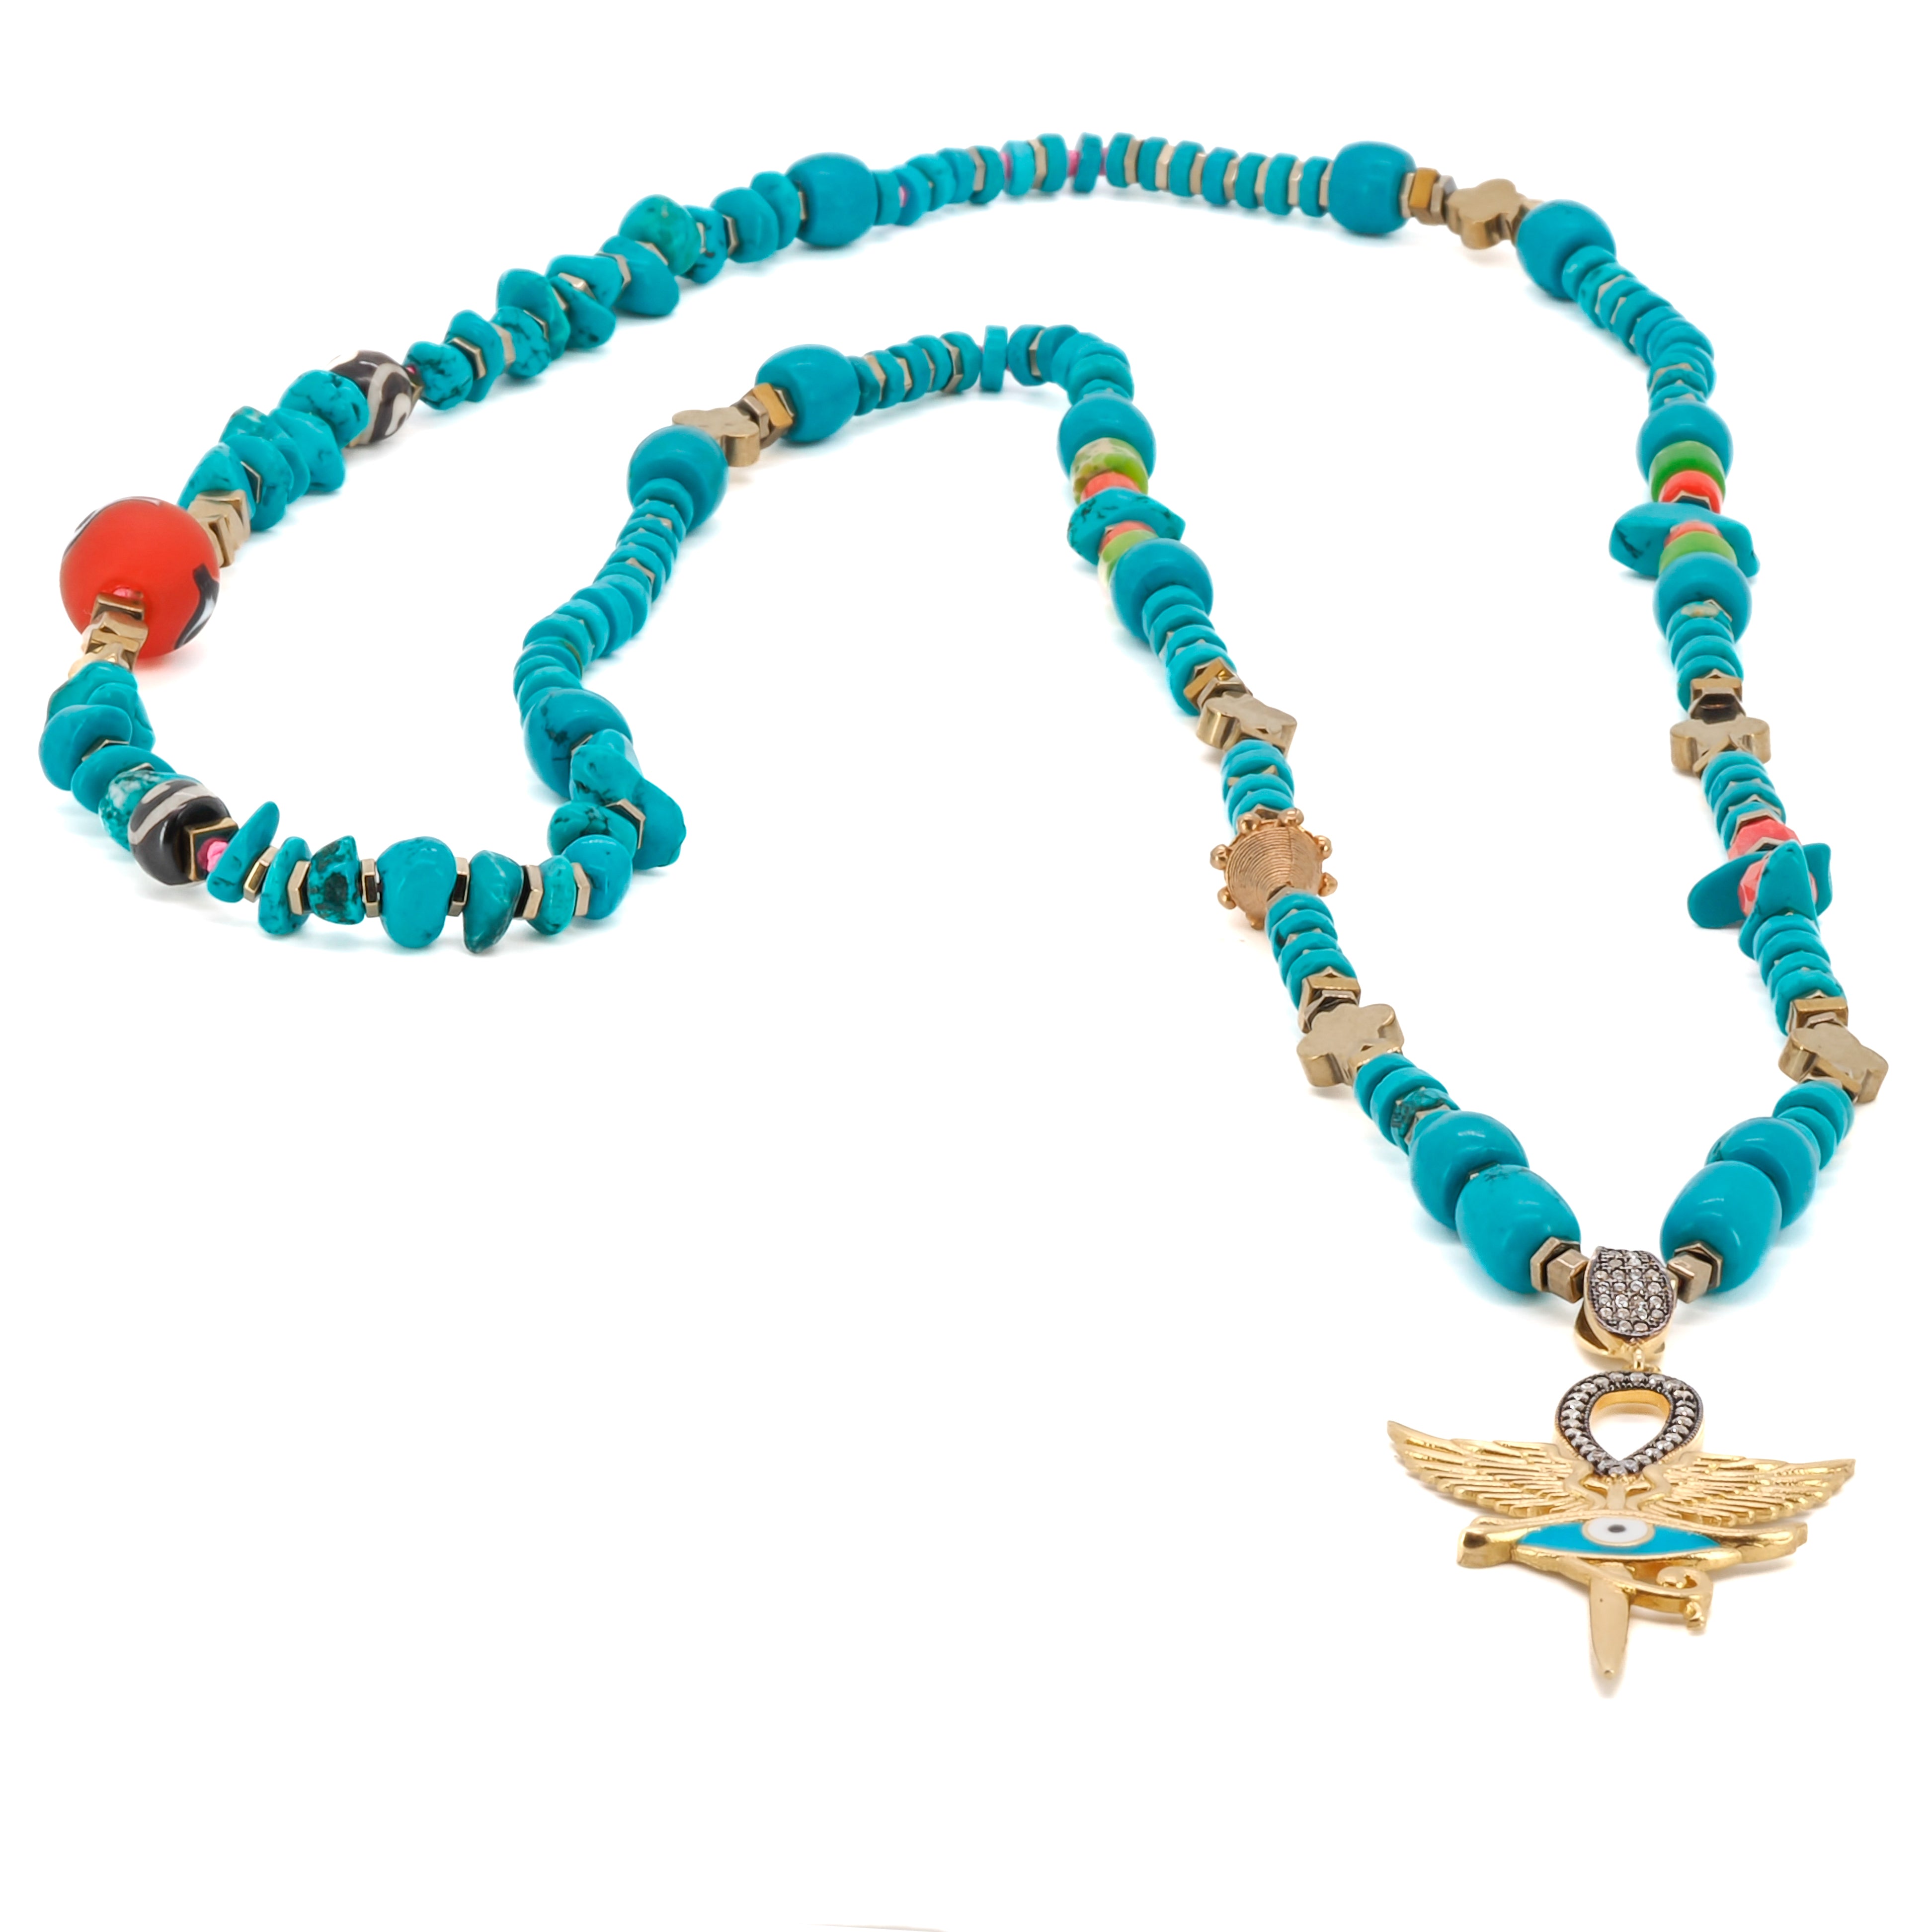 The combination of turquoise, gold hematite, and coral beads on the Unique Eye of Horus Turquoise Necklace